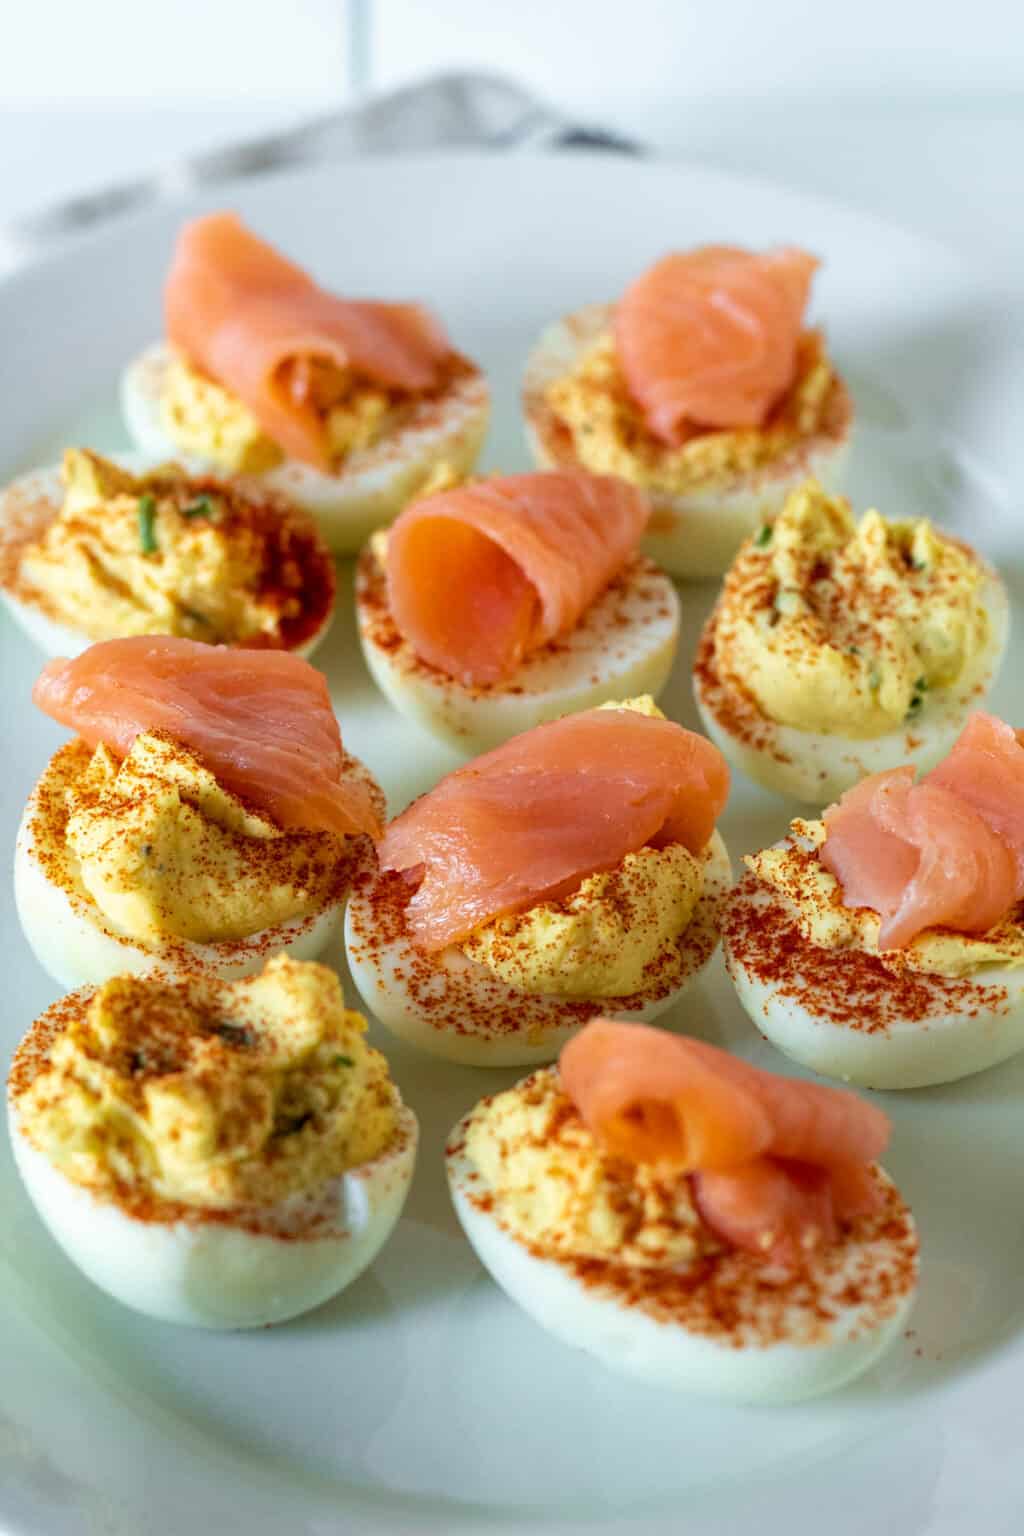 Deviled Eggs With Smoked Salmon - The Hungry Bluebird